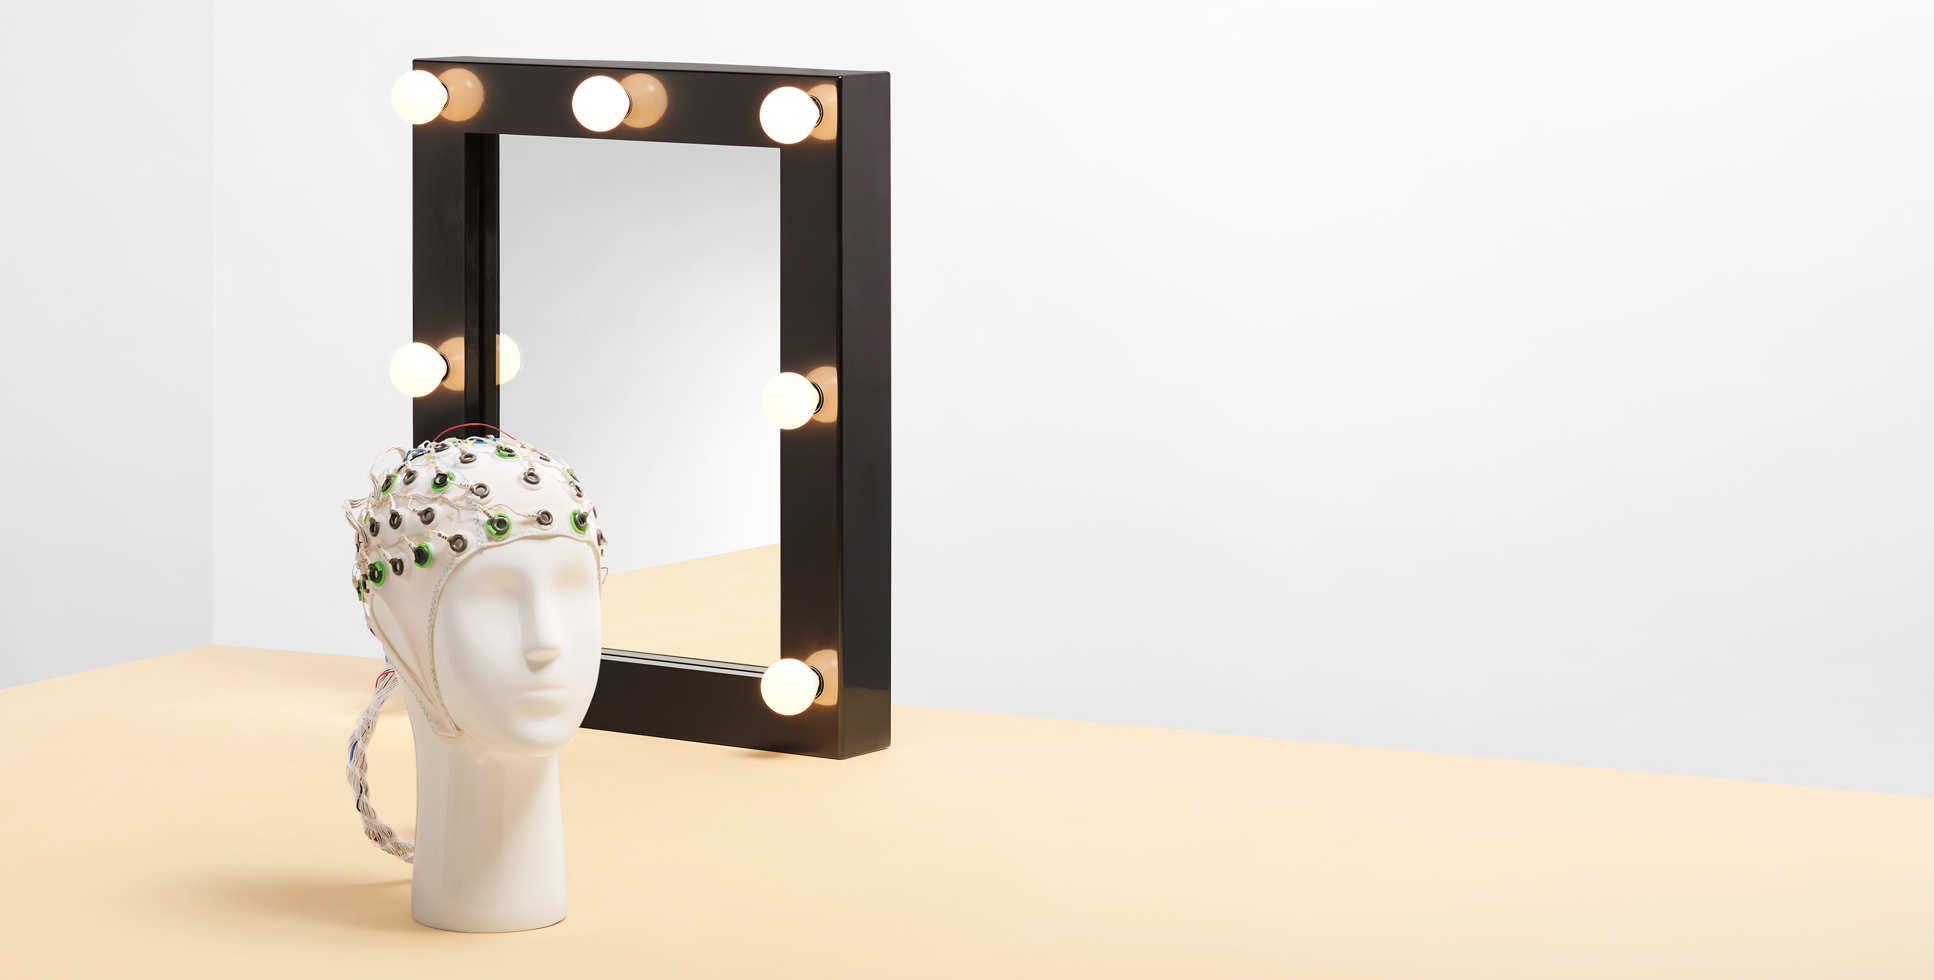 A mannequin of a head fitted with a brain monitor, in front of a mirror